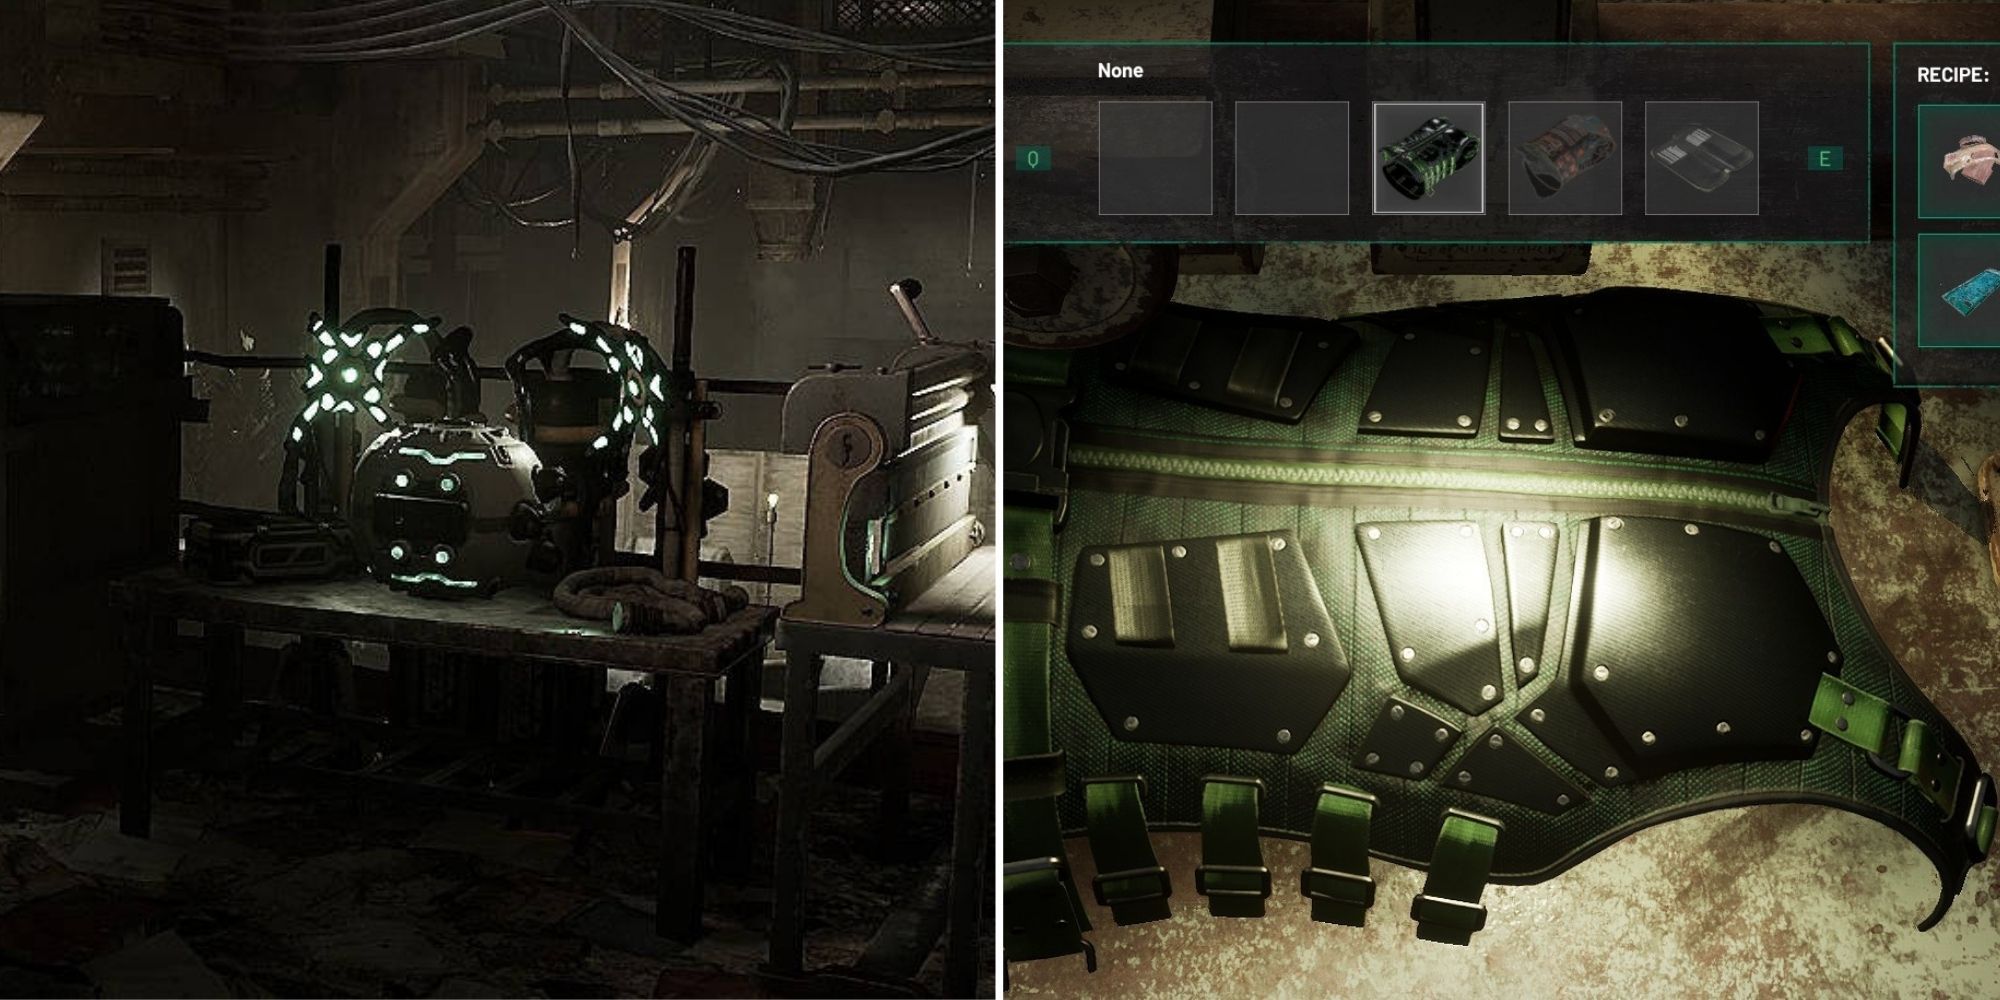 On the left is an image of the work bench in the base and on the right is armor on a table in Chernobylite